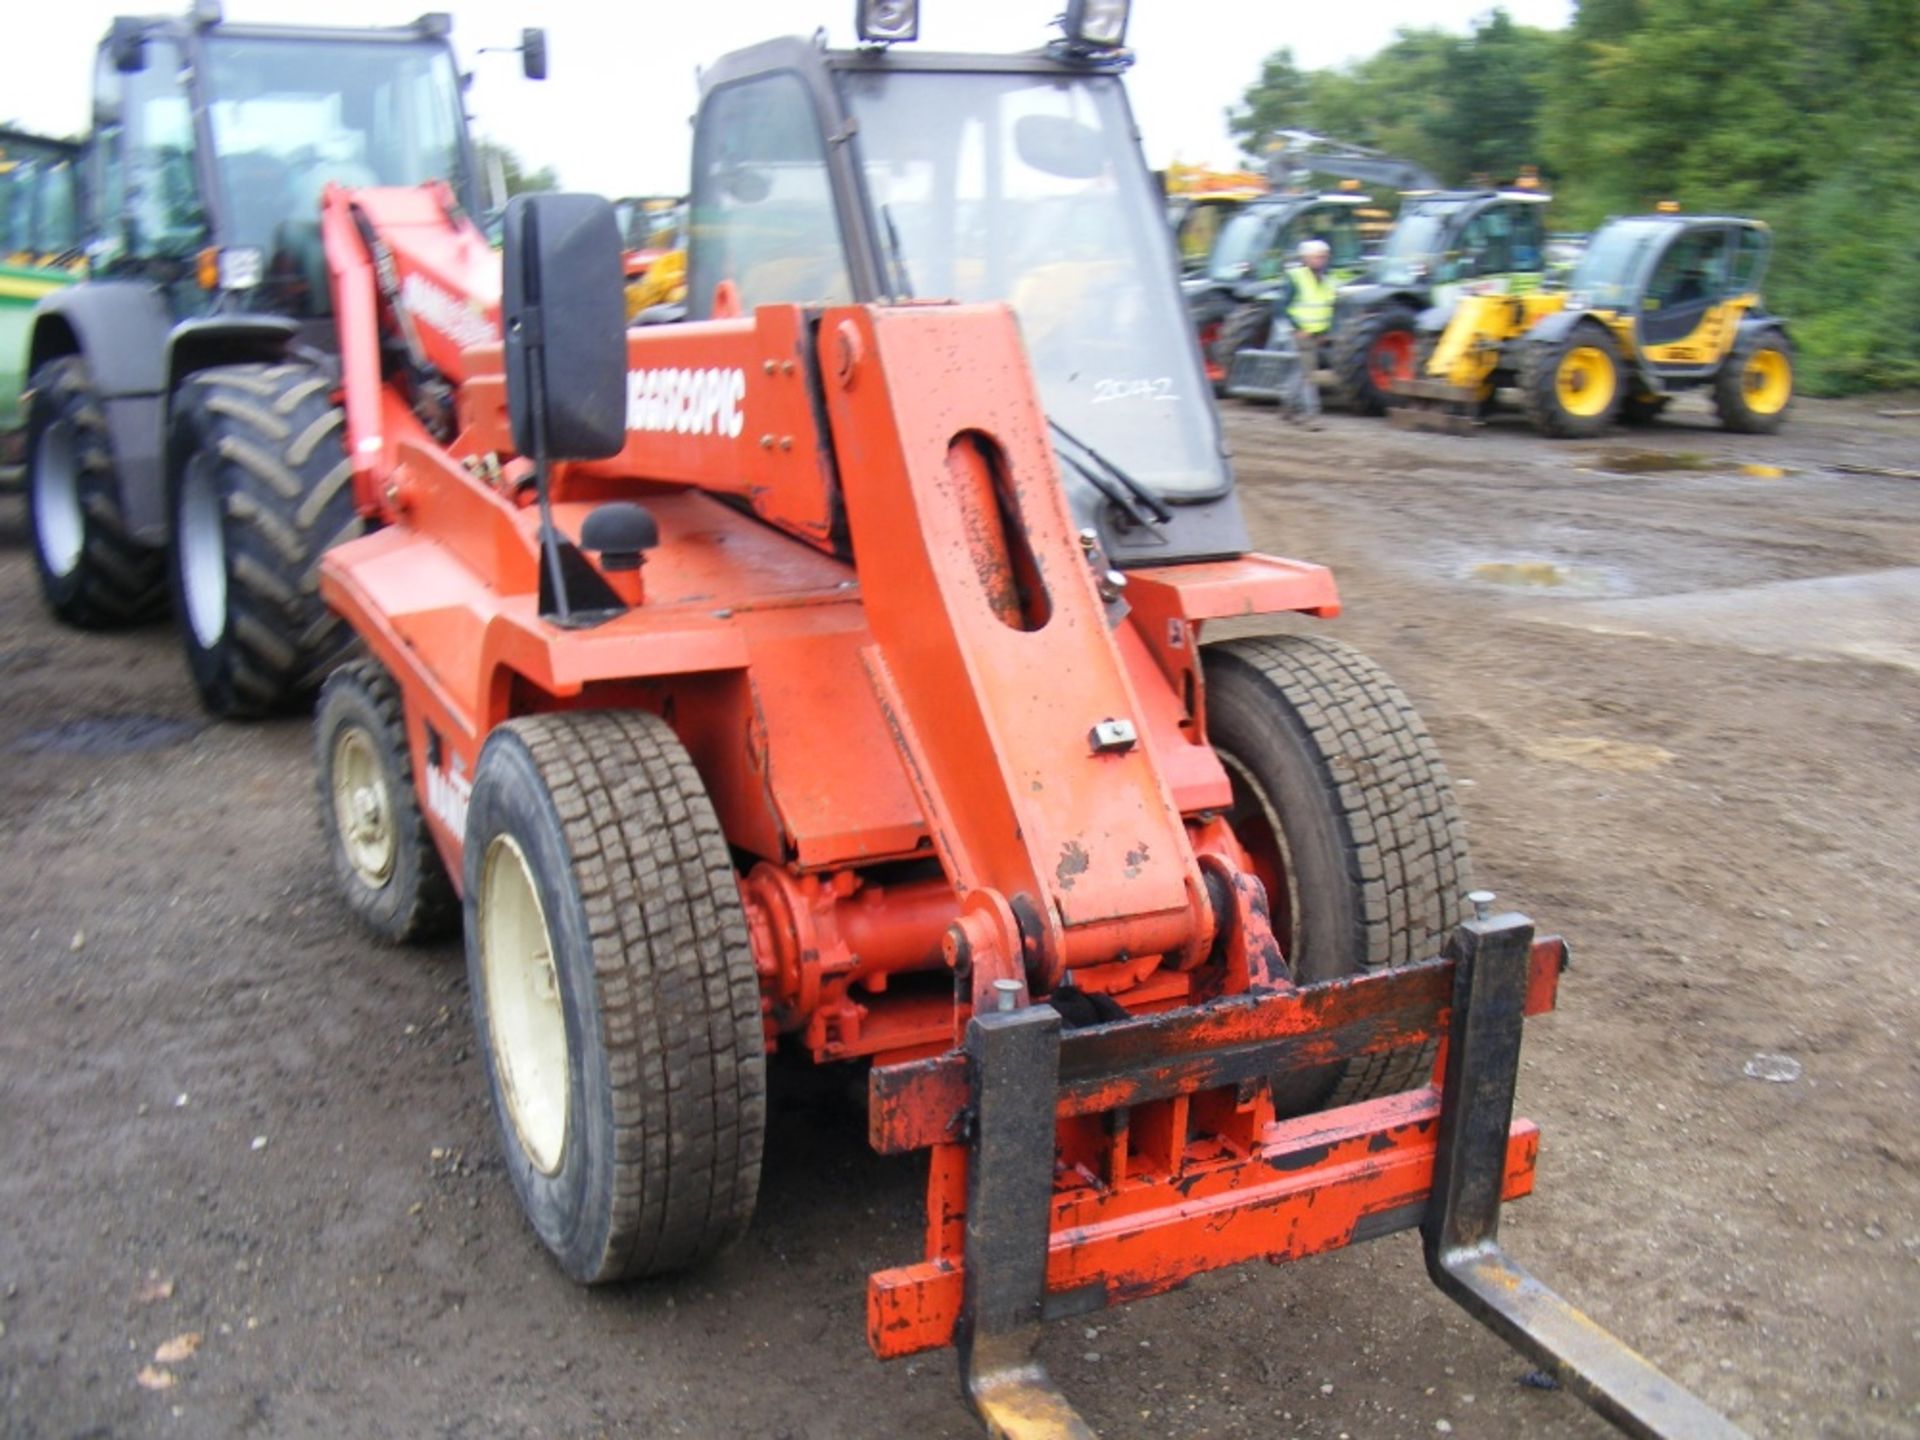 Manitou BT1 225 Buggiscopic. Manufactured 1995. 1st Reg 24/7/96. Handbook & V5 will be supplied - Image 2 of 3